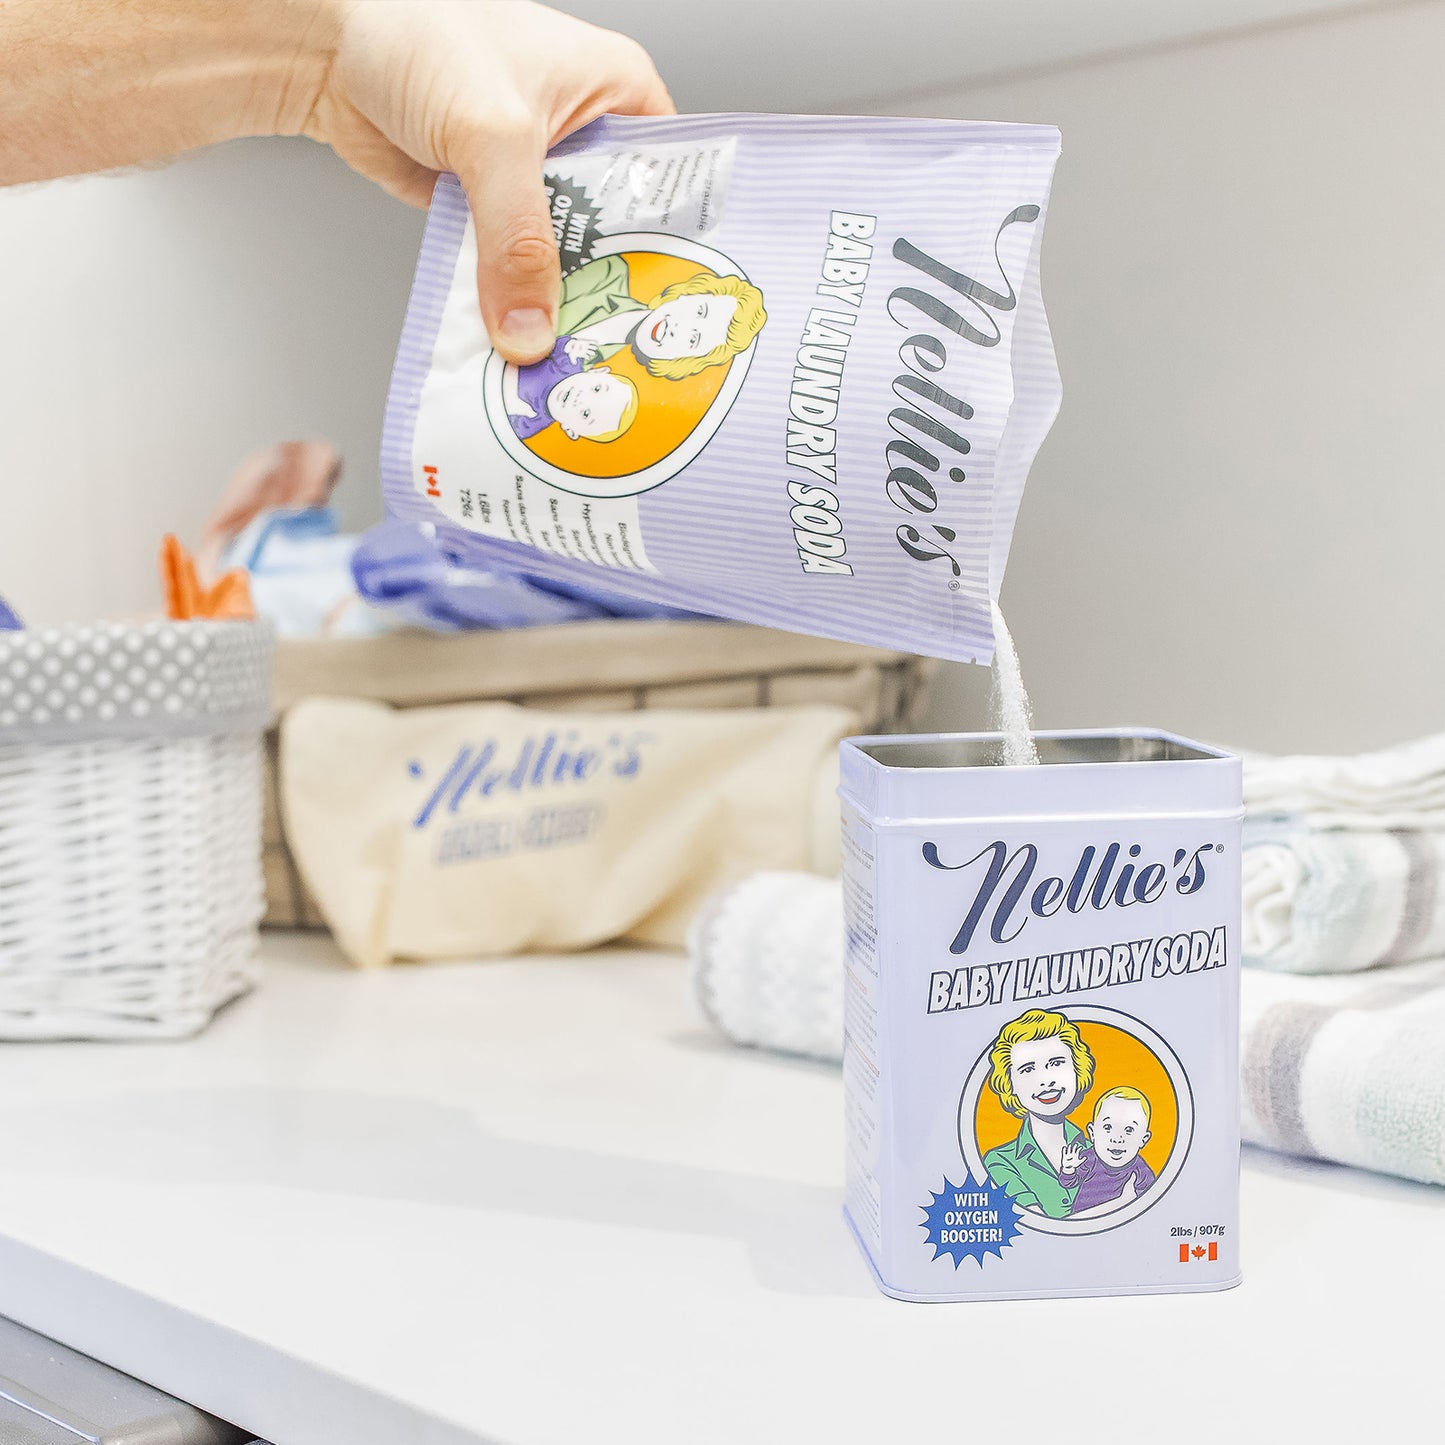 A male hand pouring Nellie's Baby Laundry Soda from Refill pack into its Tin.